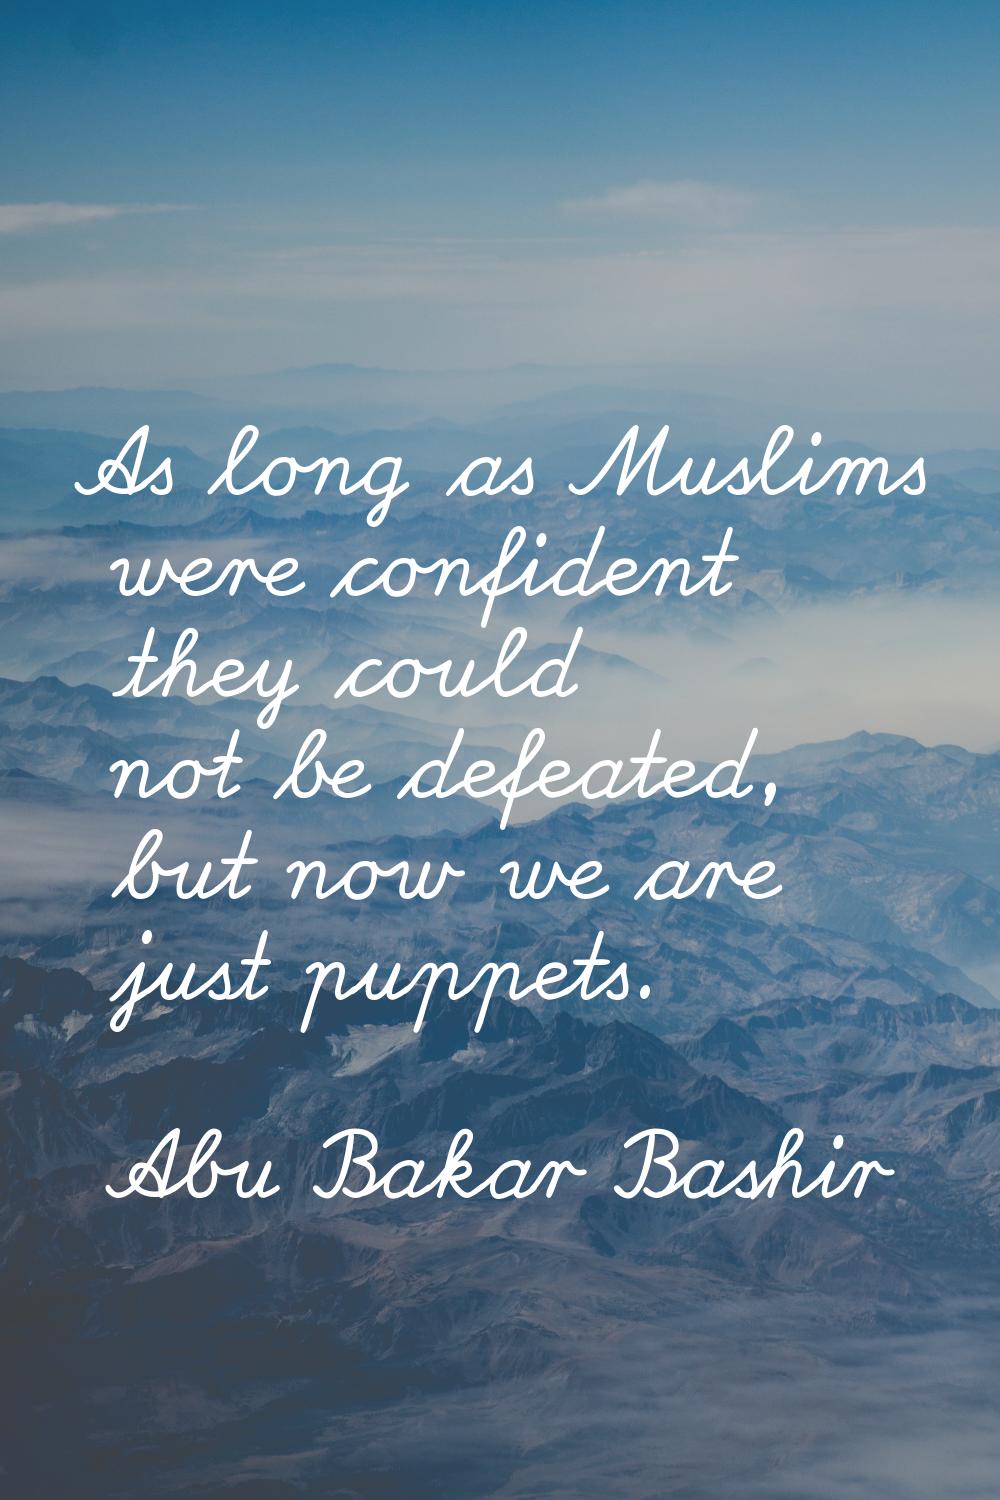 As long as Muslims were confident they could not be defeated, but now we are just puppets.